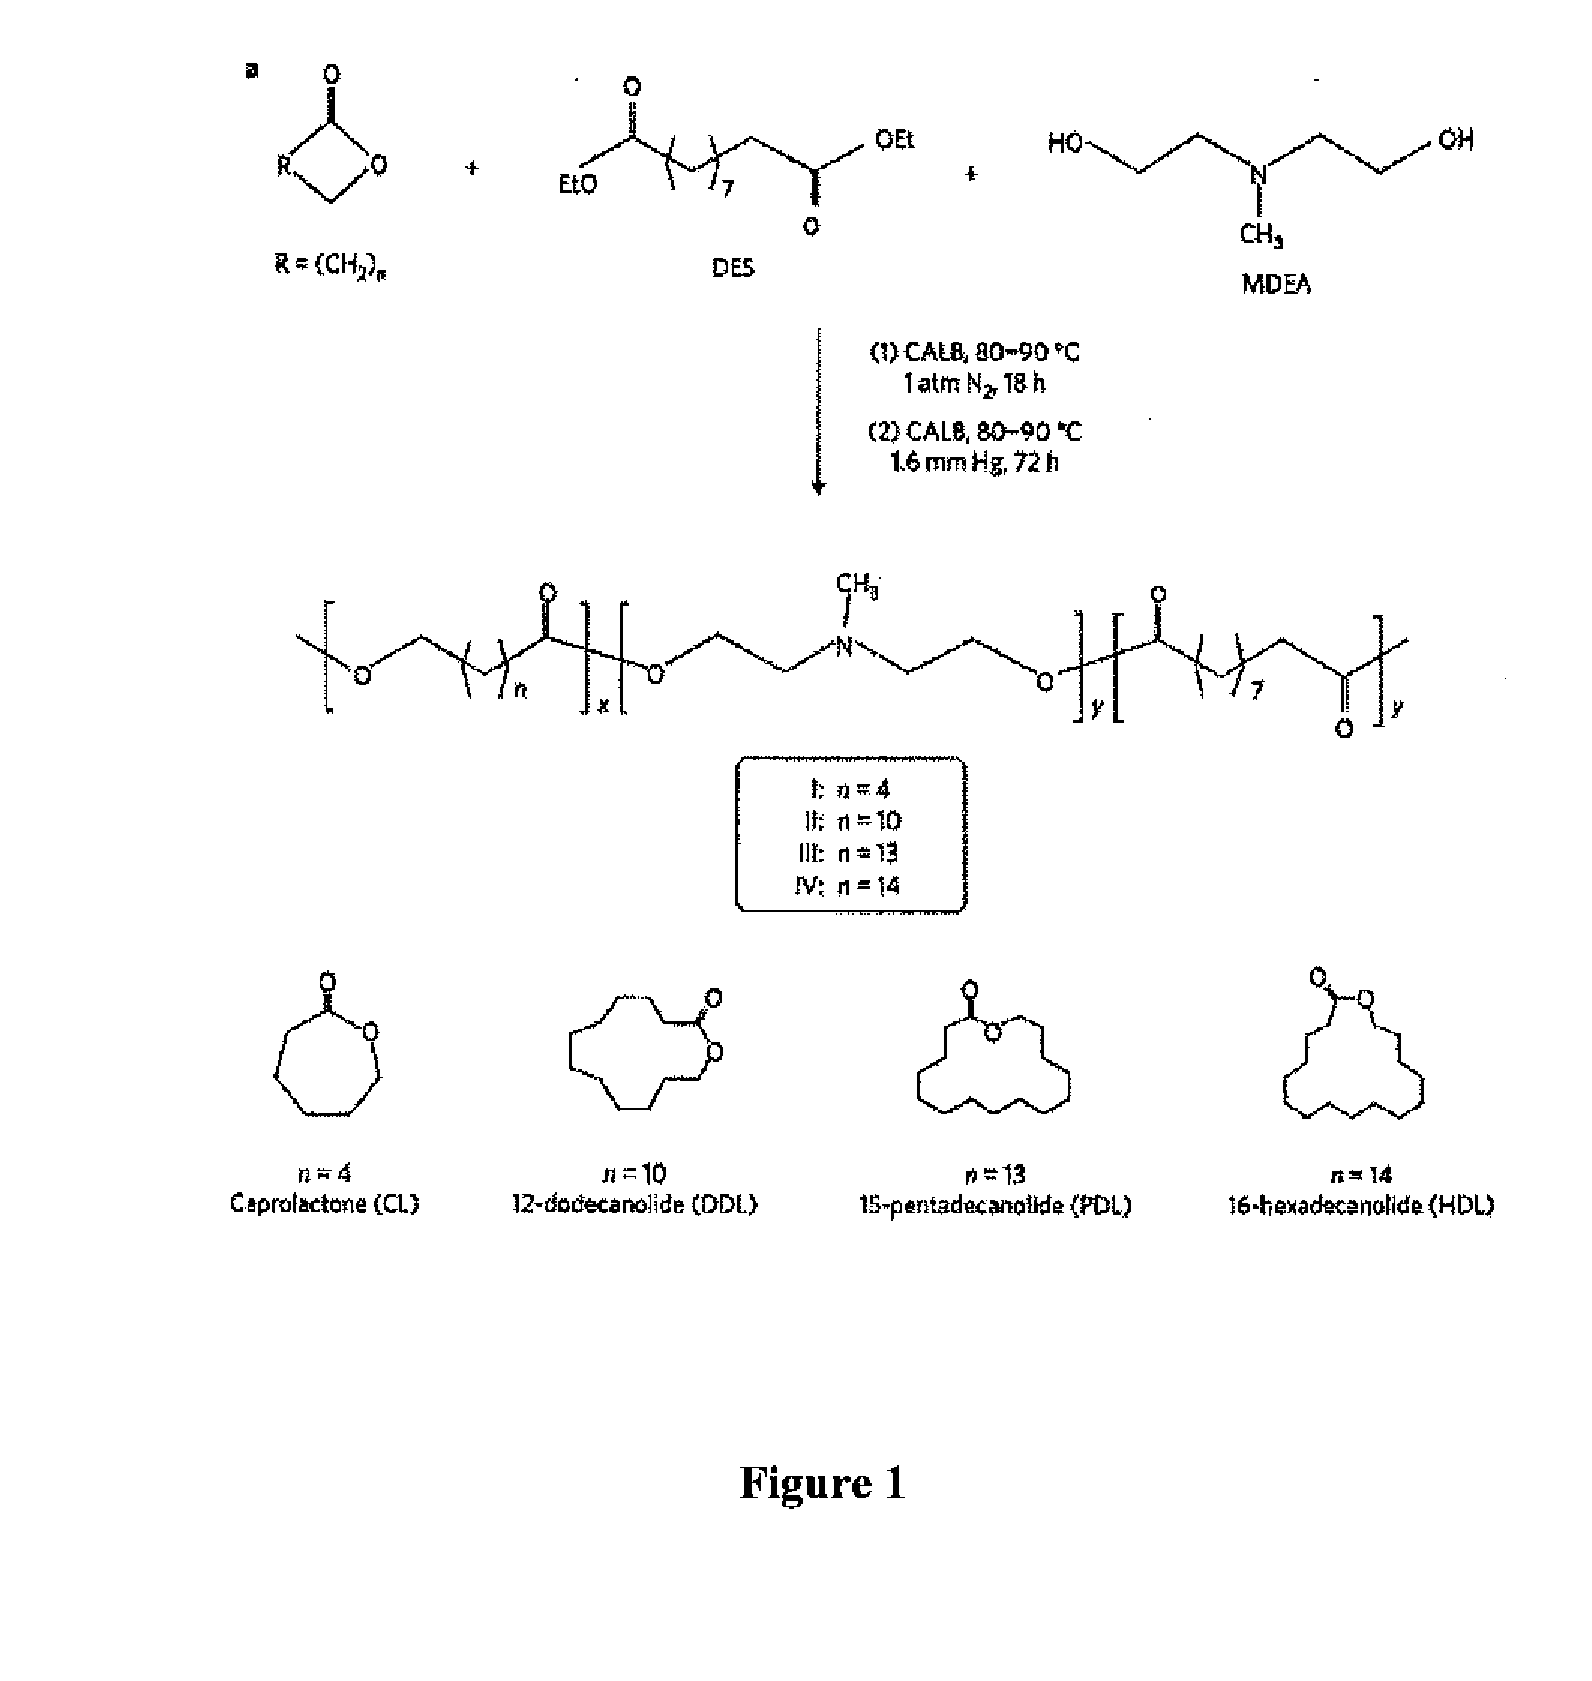 Enzymatic synthesis of poly(amine-co-esters) and methods of use thereof for gene delivery